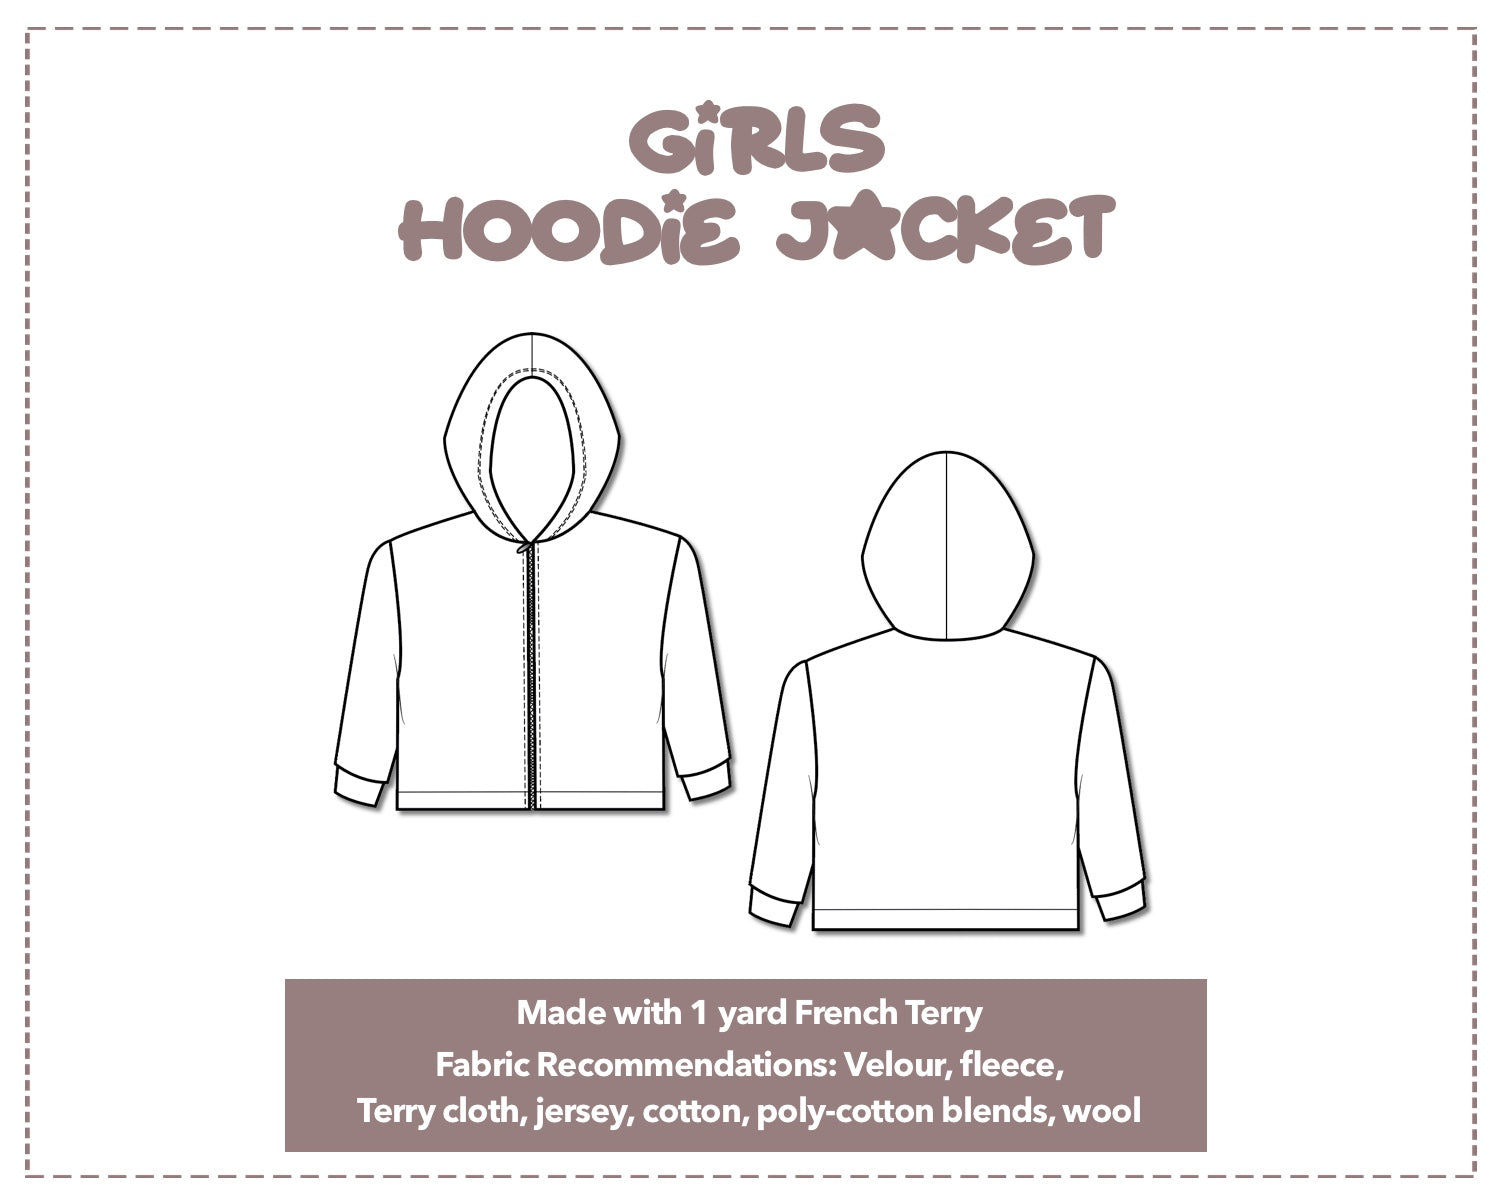 Illustration and detailed description for Girls Zip Up Hoodie Jacket sewing pattern.